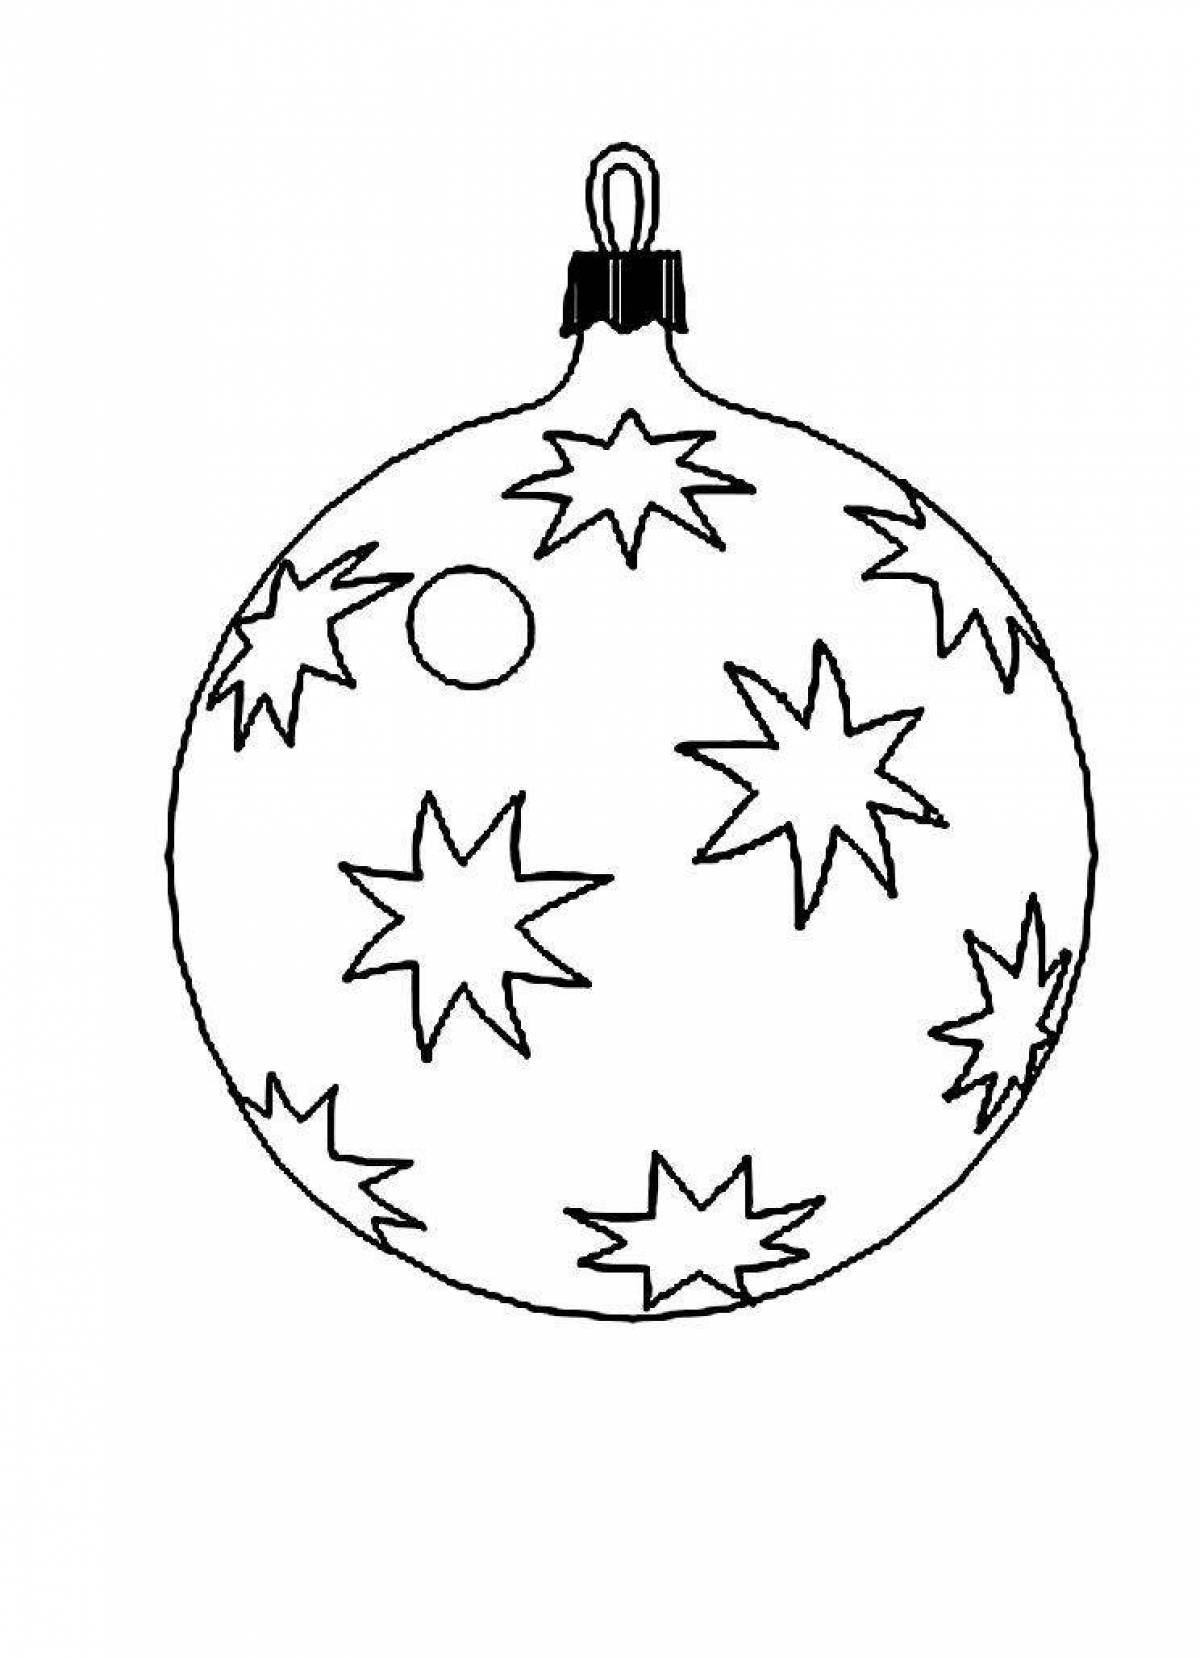 Exquisite Christmas ball coloring book for kids